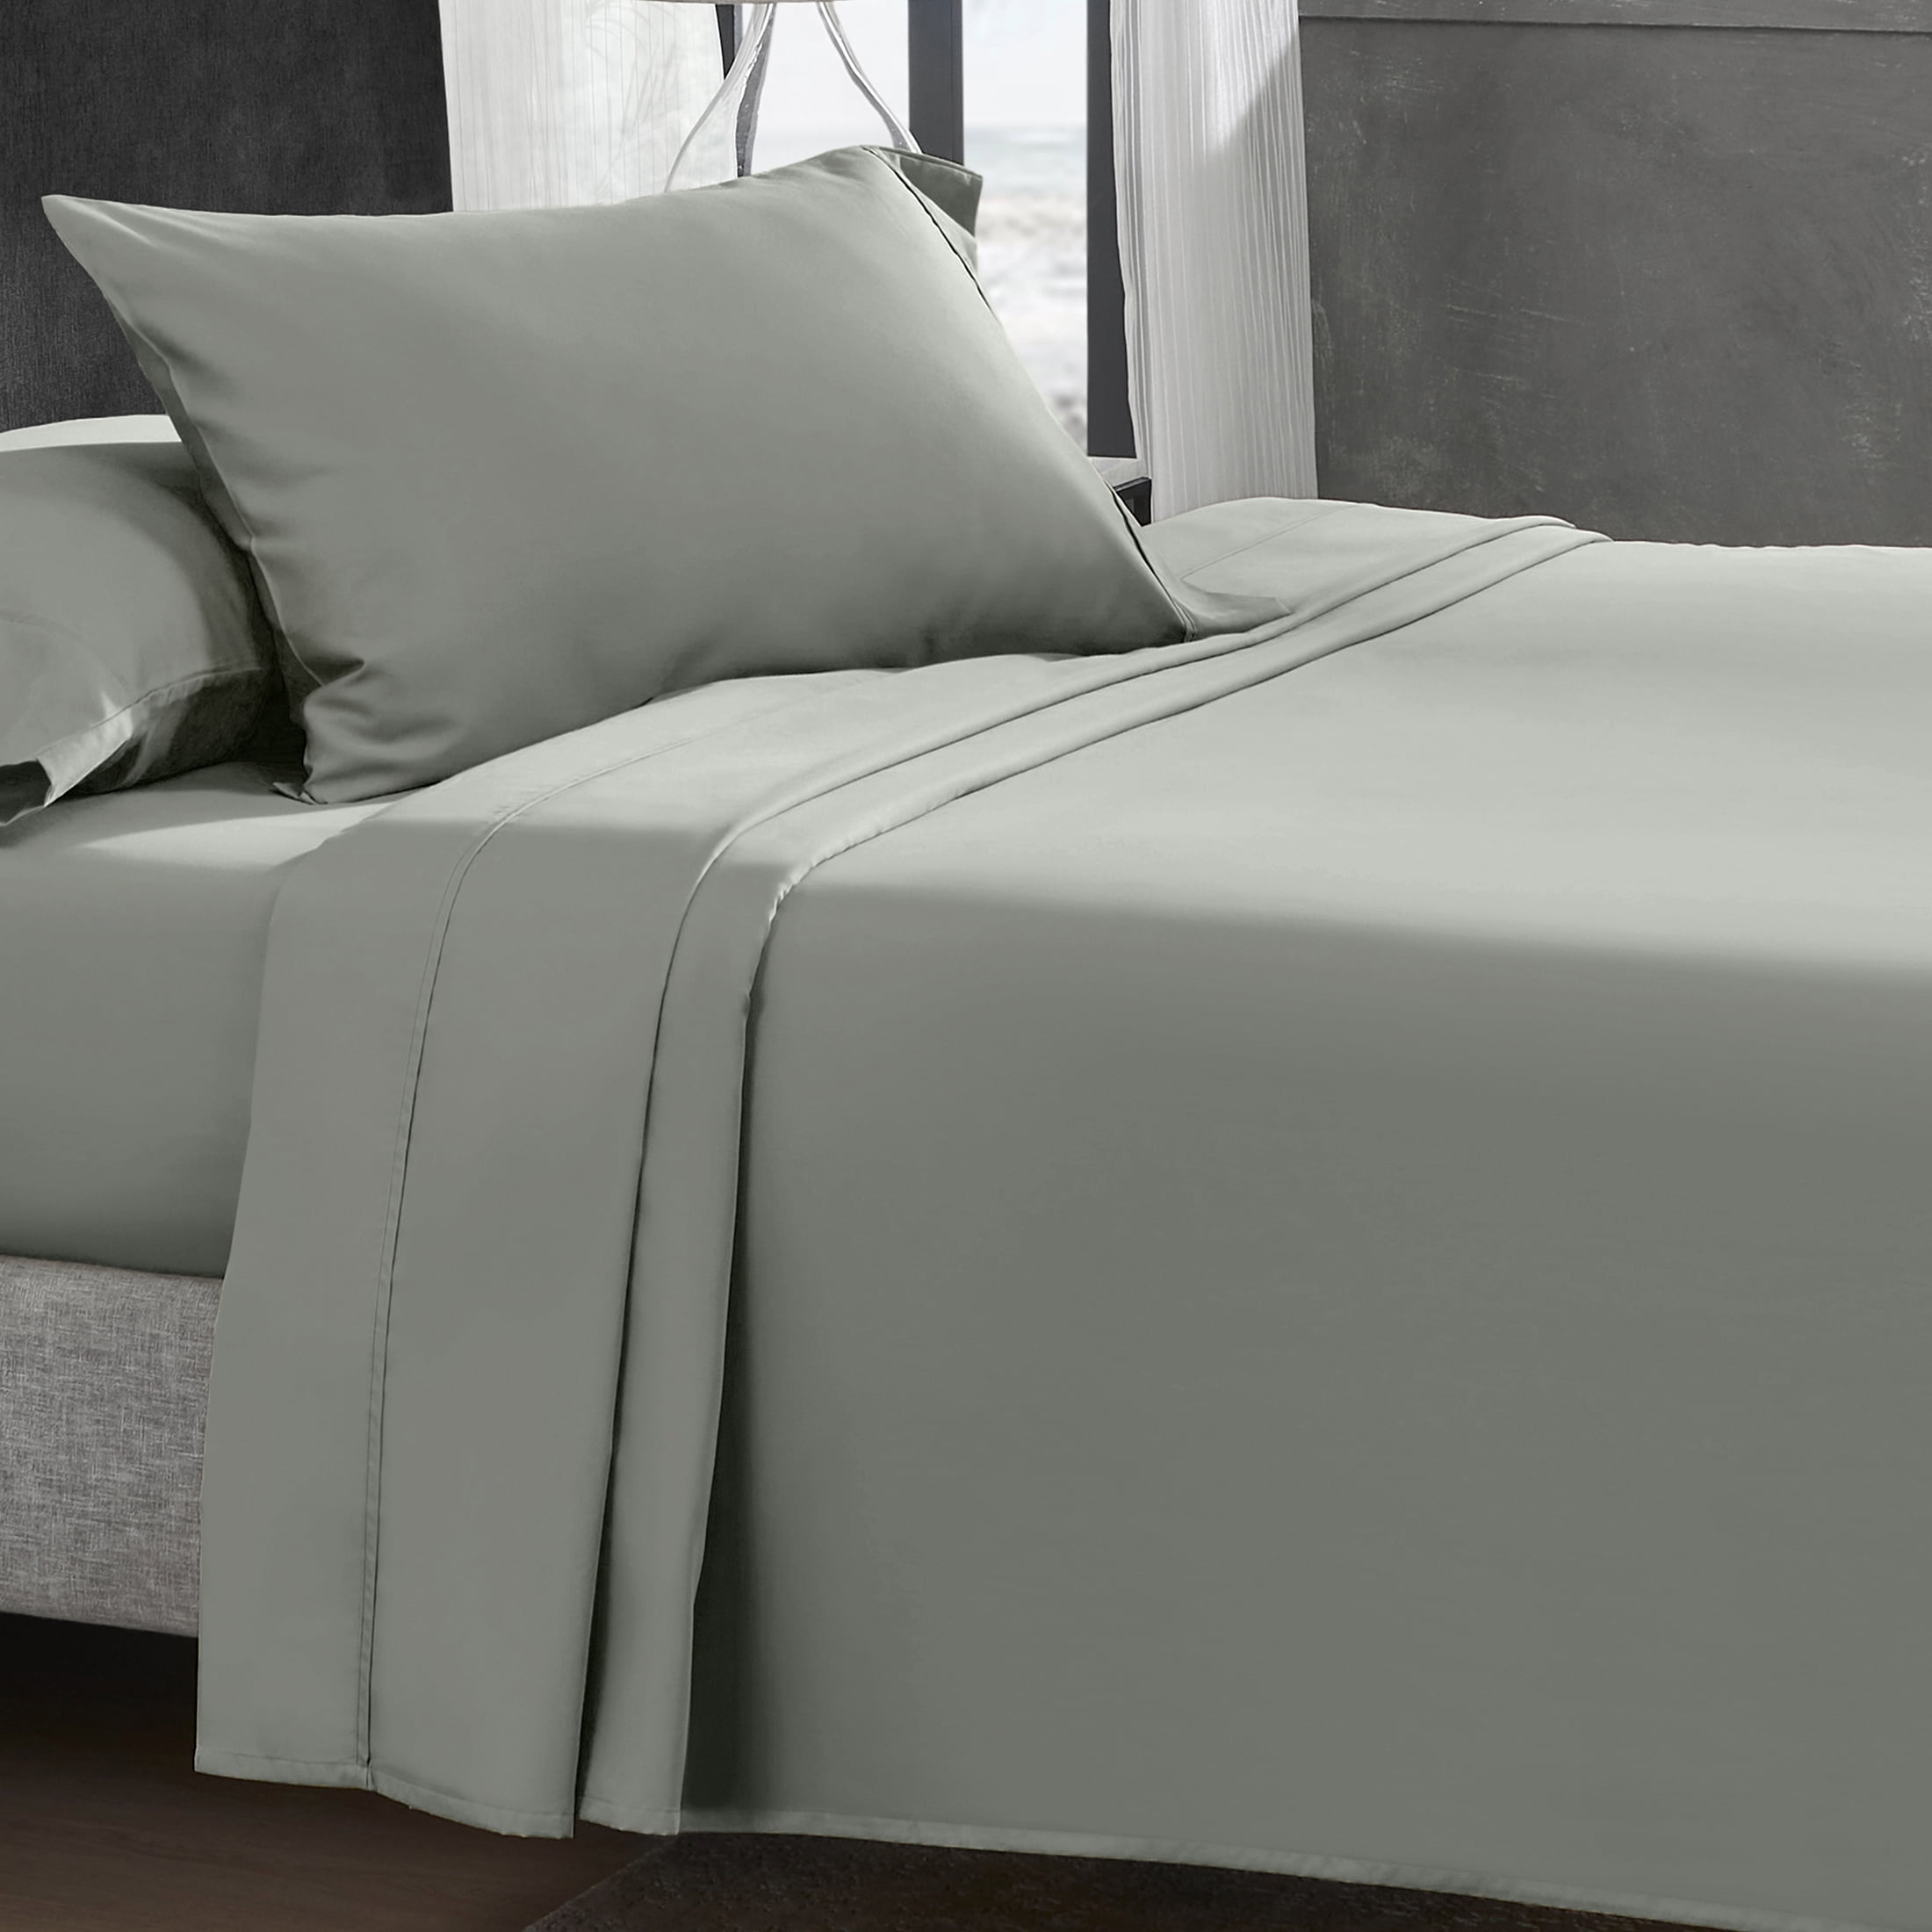 Details about   Comfort Deep Pocket Fitted Sheet+Pillow US King All Color Best Egyptian Cotton 